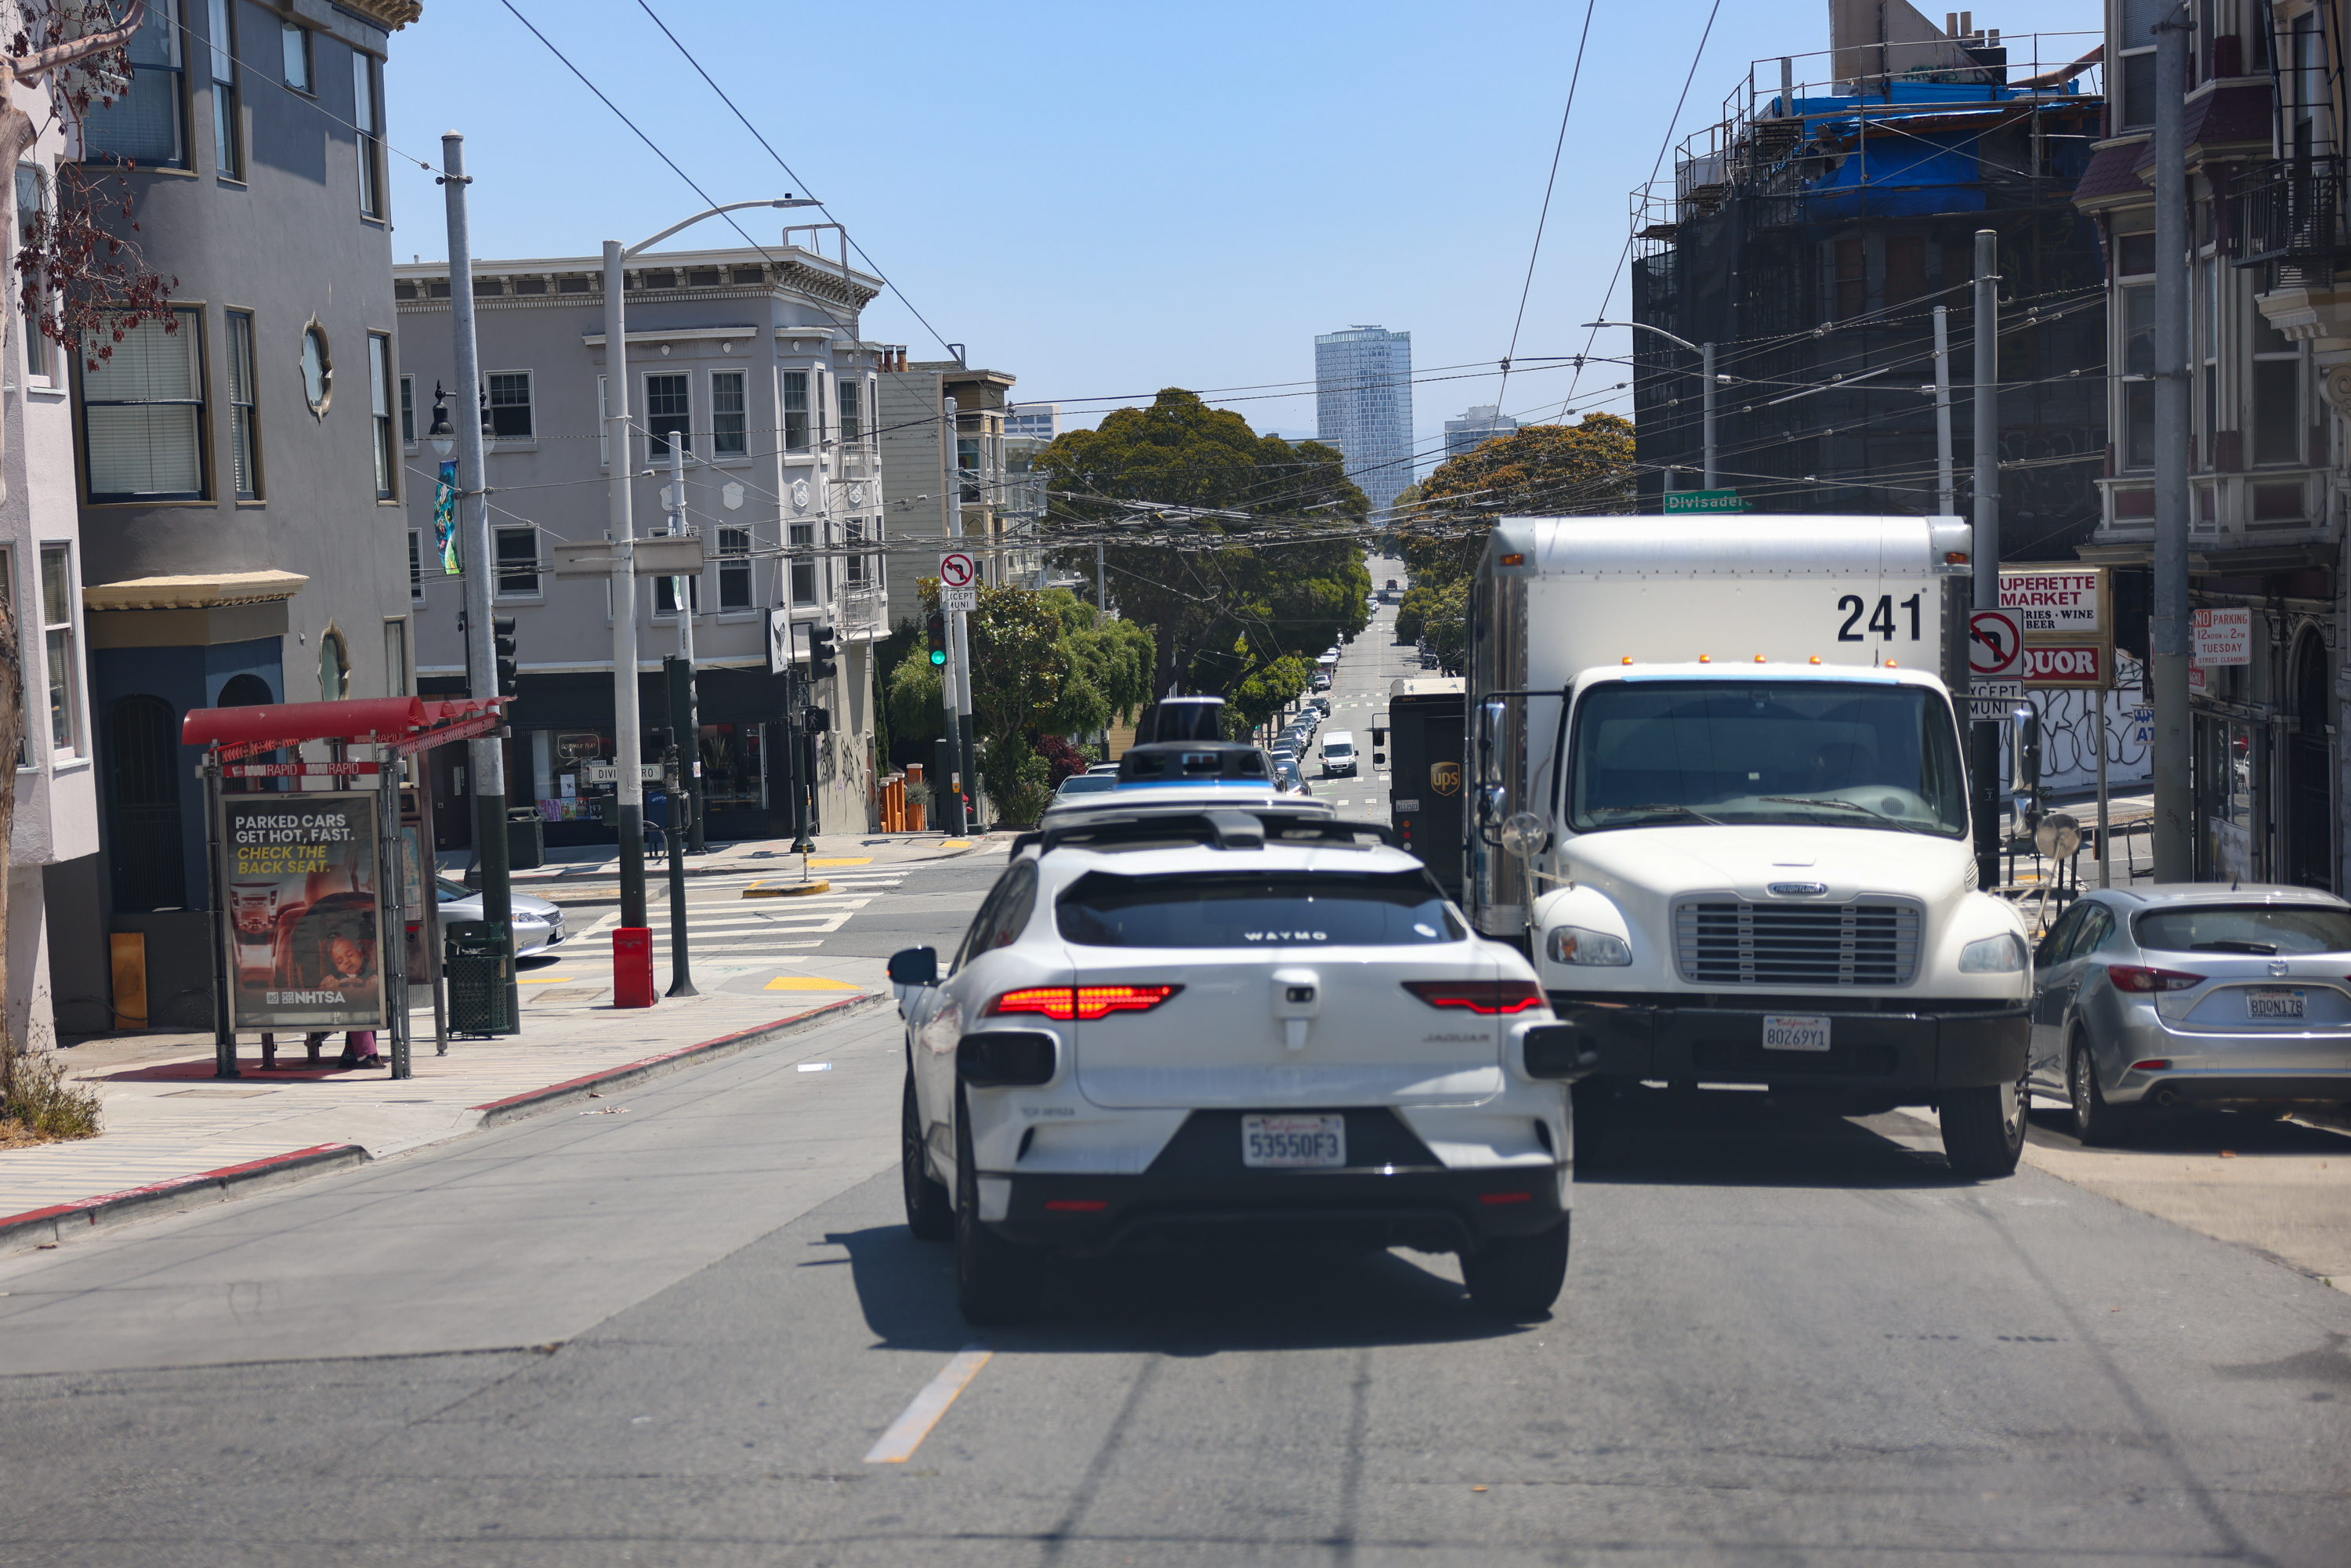 We put Waymo to the test at some of San Francisco’s trickiest intersections